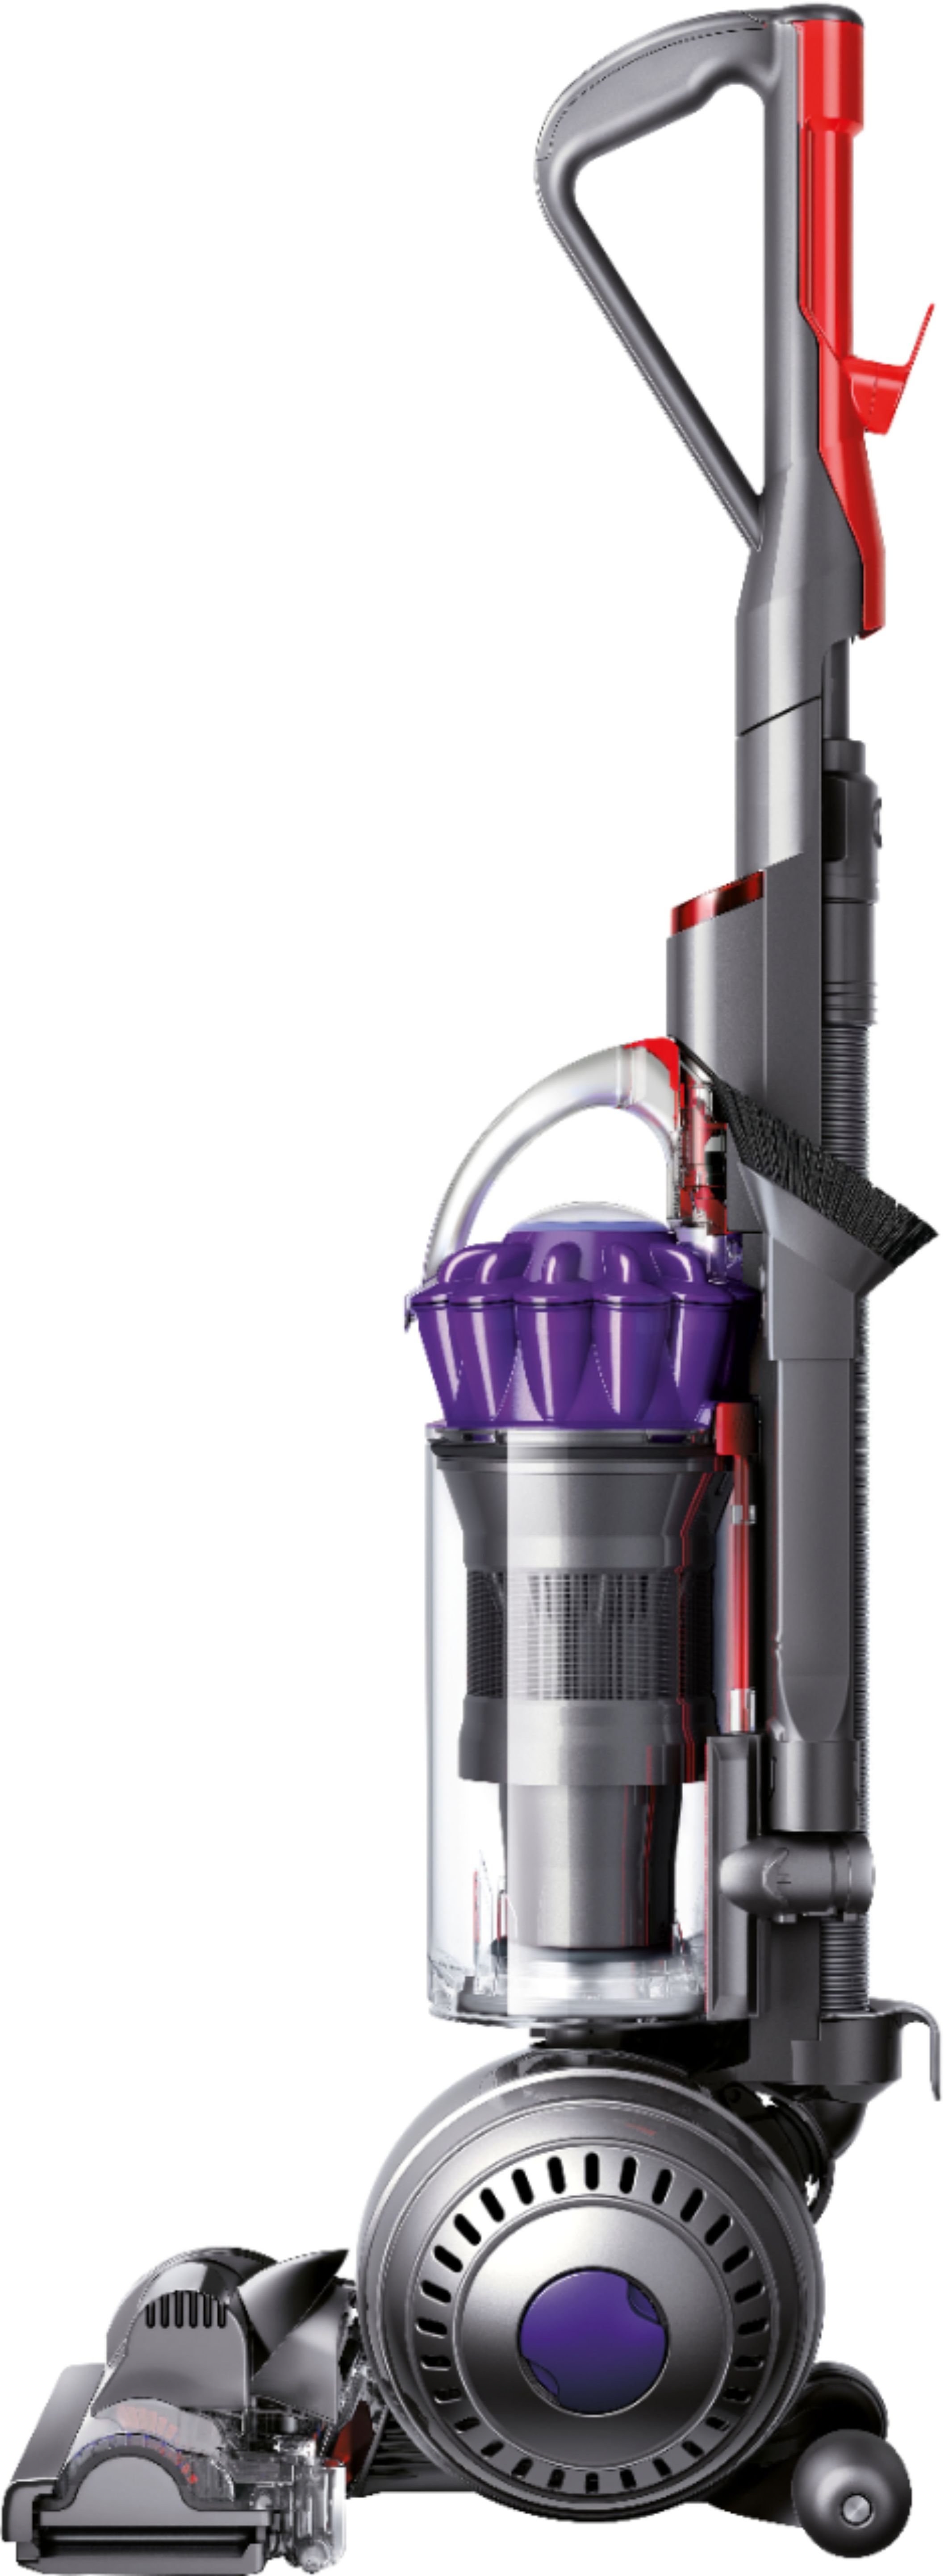 Slim Ball Animal Upright Vacuum Cleaner Troubleshooting Guide